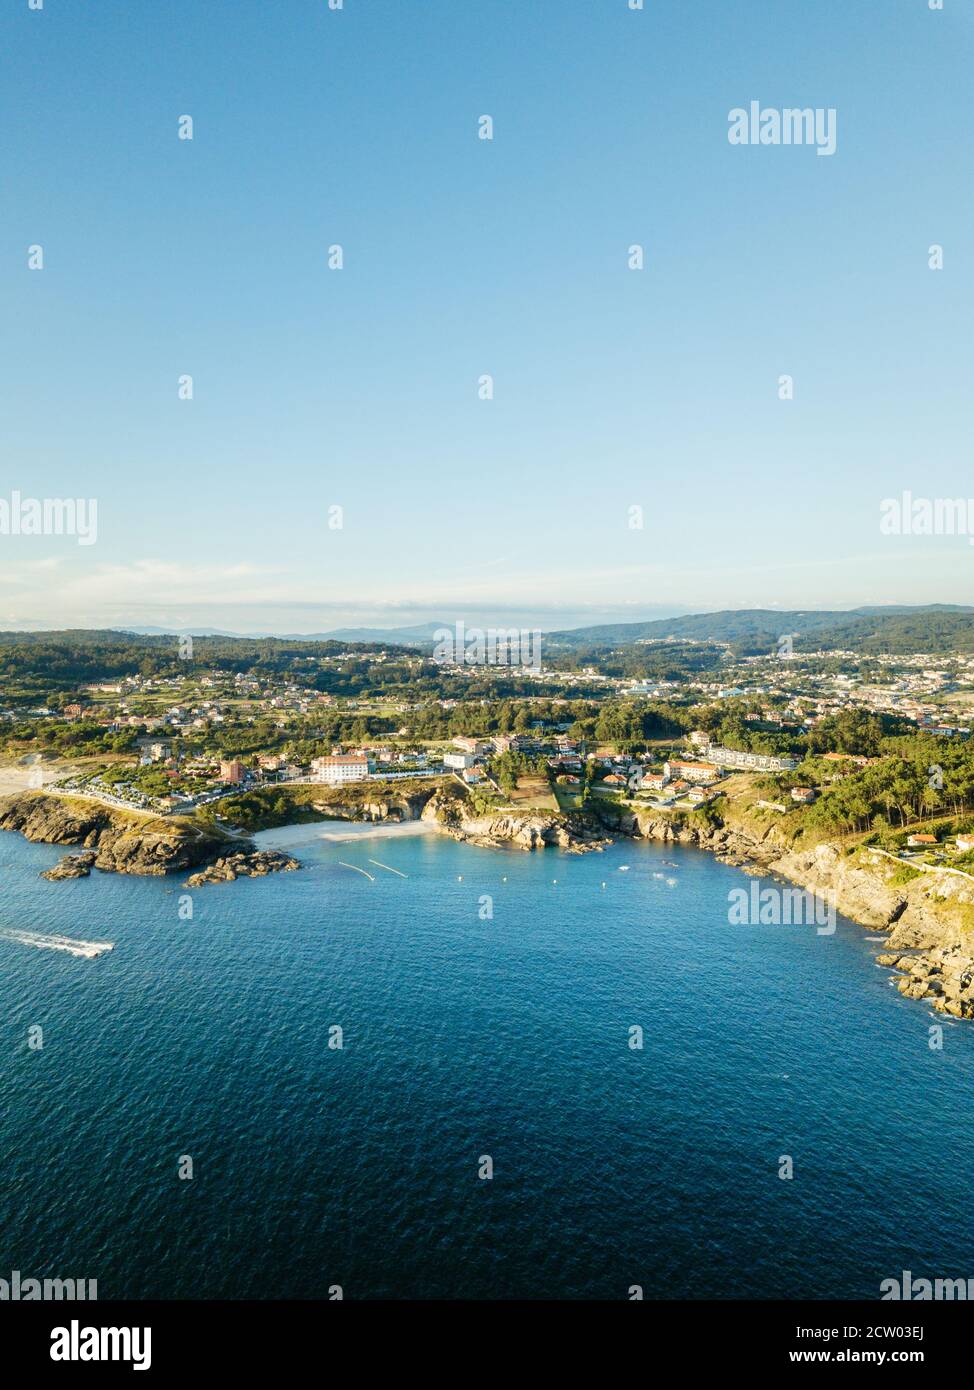 Aerial view of the Galician coast at the opening of the Ria de Pontevedra, were the Atlantic ocean meets the land. Stock Photo